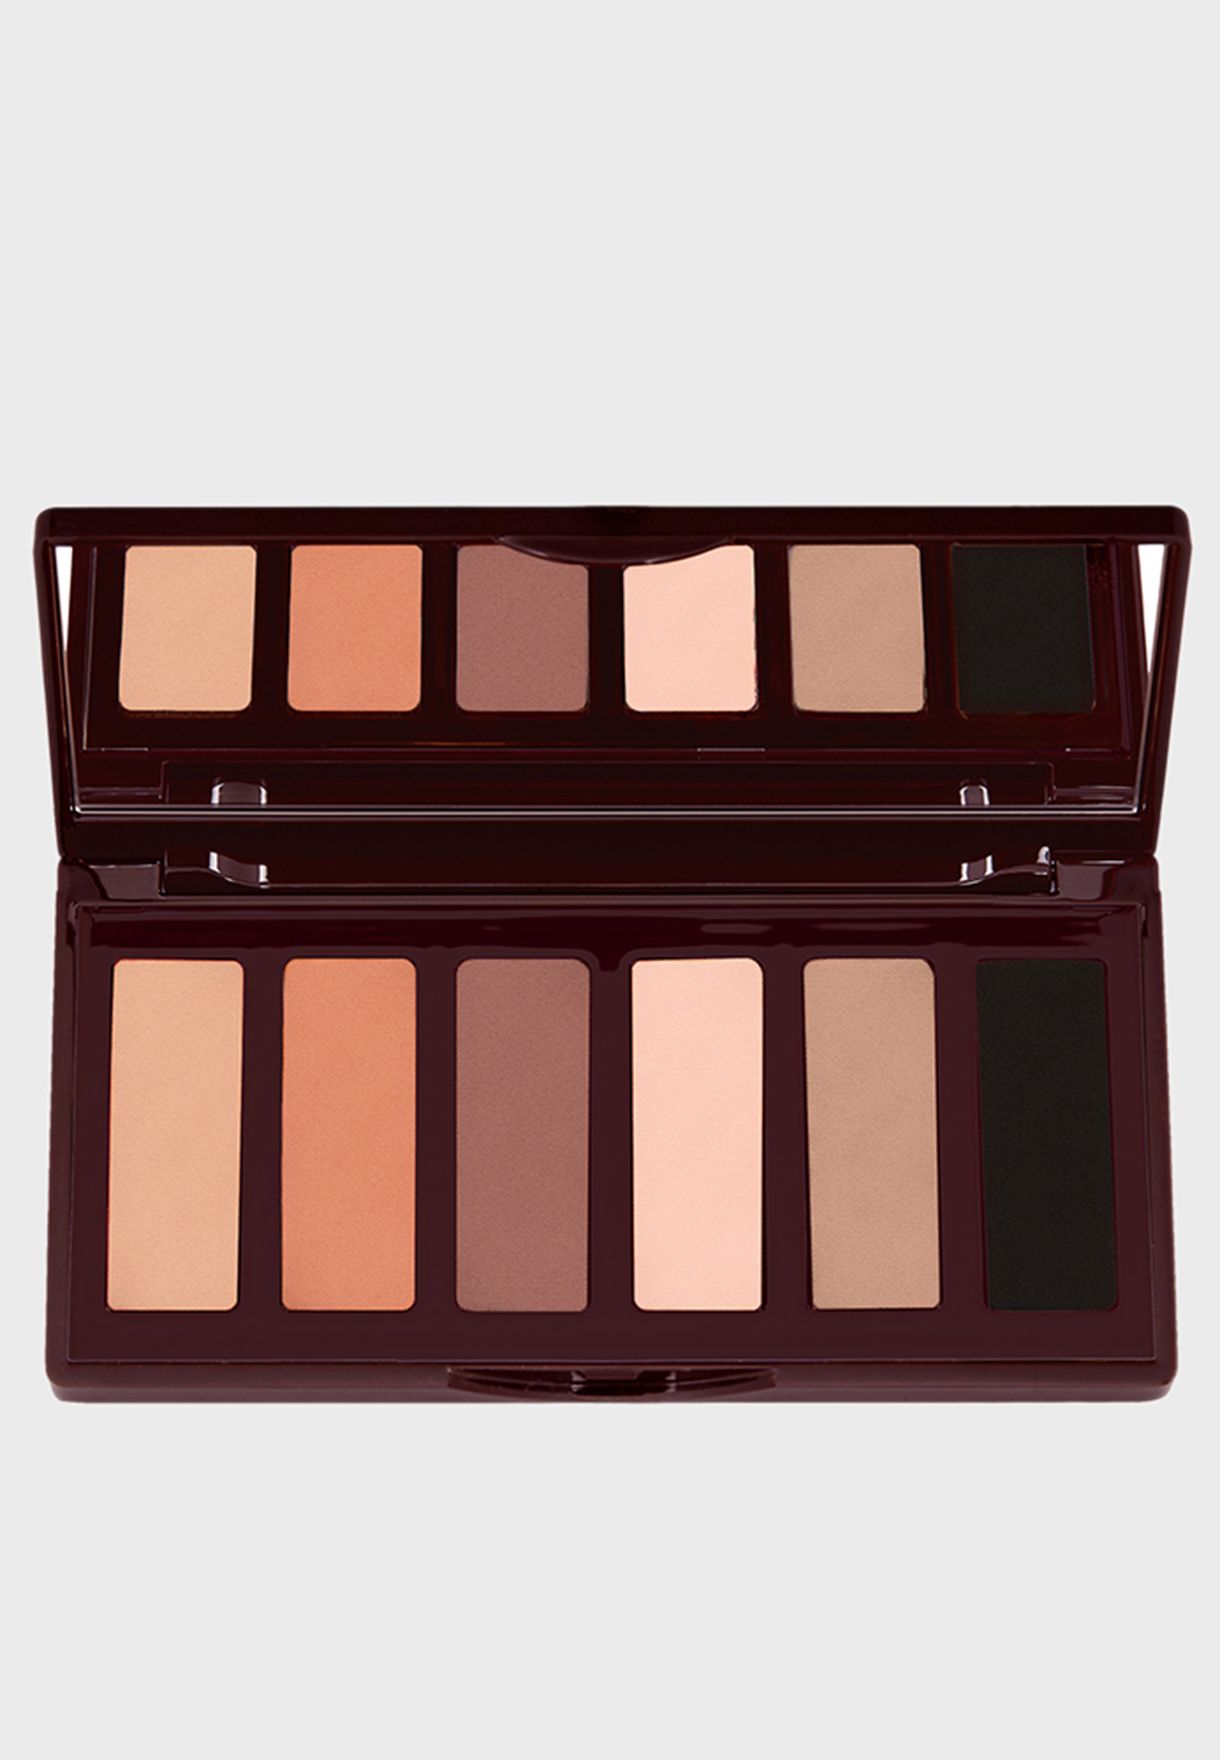 Easy Eye Palette - The Super Nudes